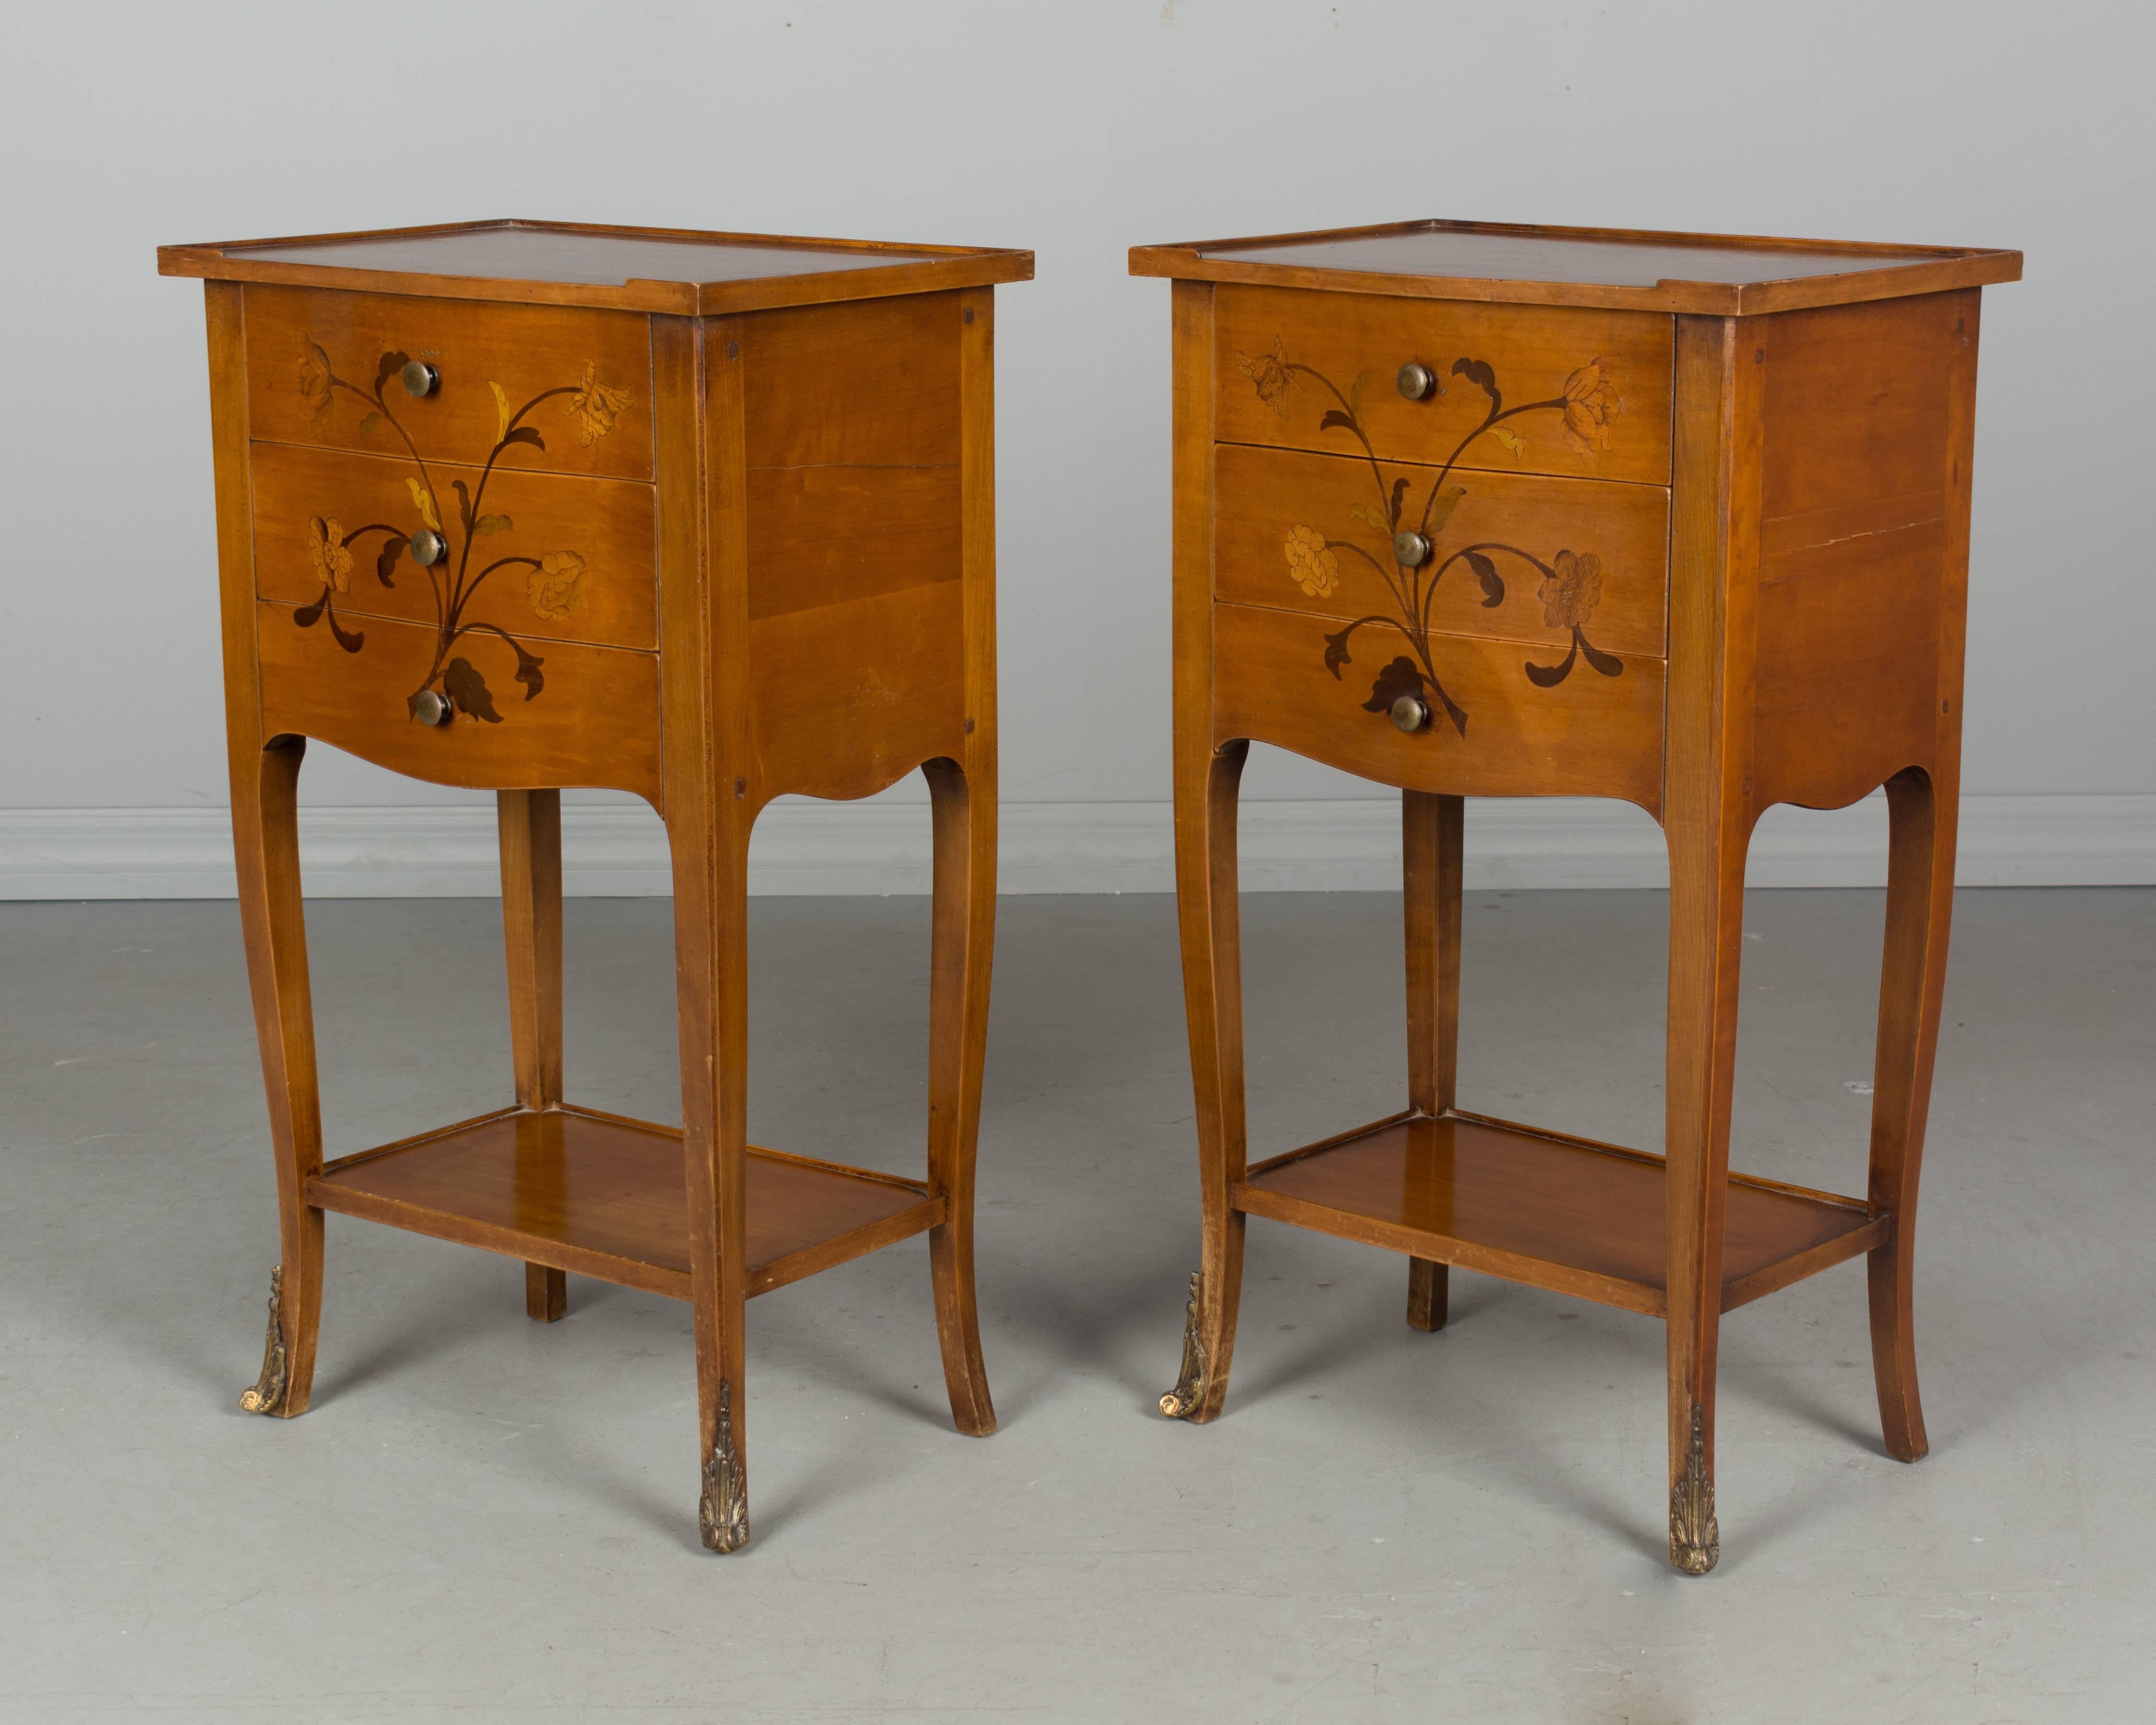 Pair of French Louis XV style marquetry side tables or nightstands made of cheerywood with inlaid veneer of walnut. Two dovetailed drawers with brass knobs. Slender curved legs with decorative brass sabots.